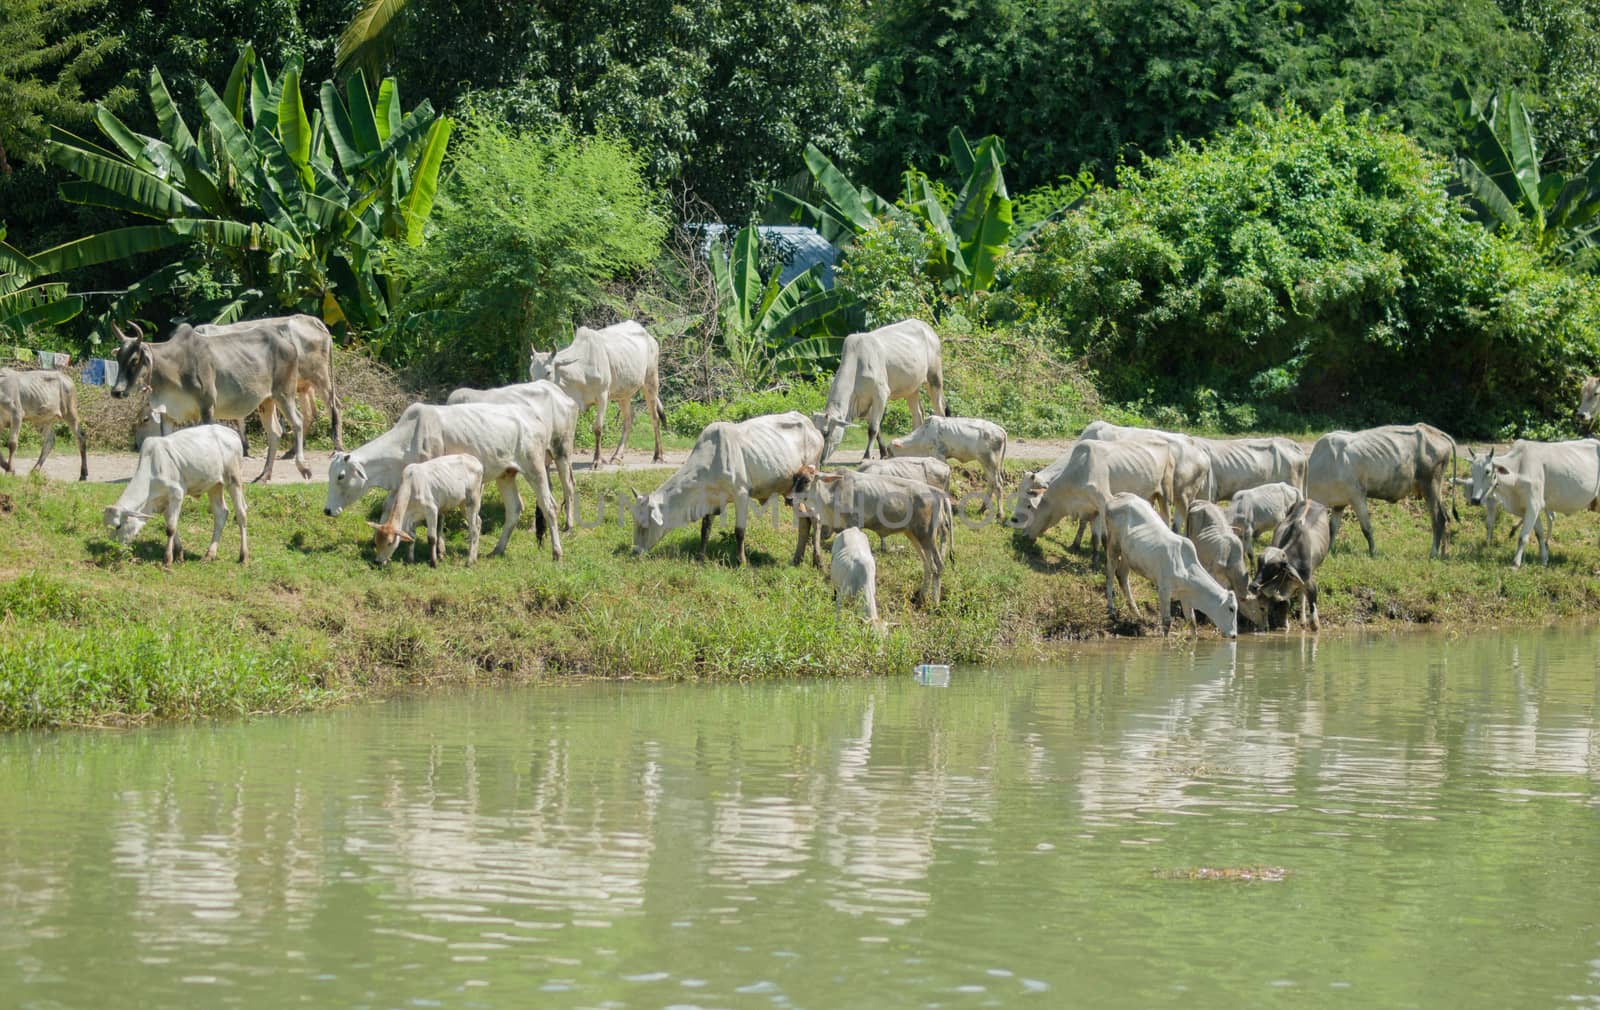 COWS AT A RIVERBANK DRINKING WATER by PrettyTG